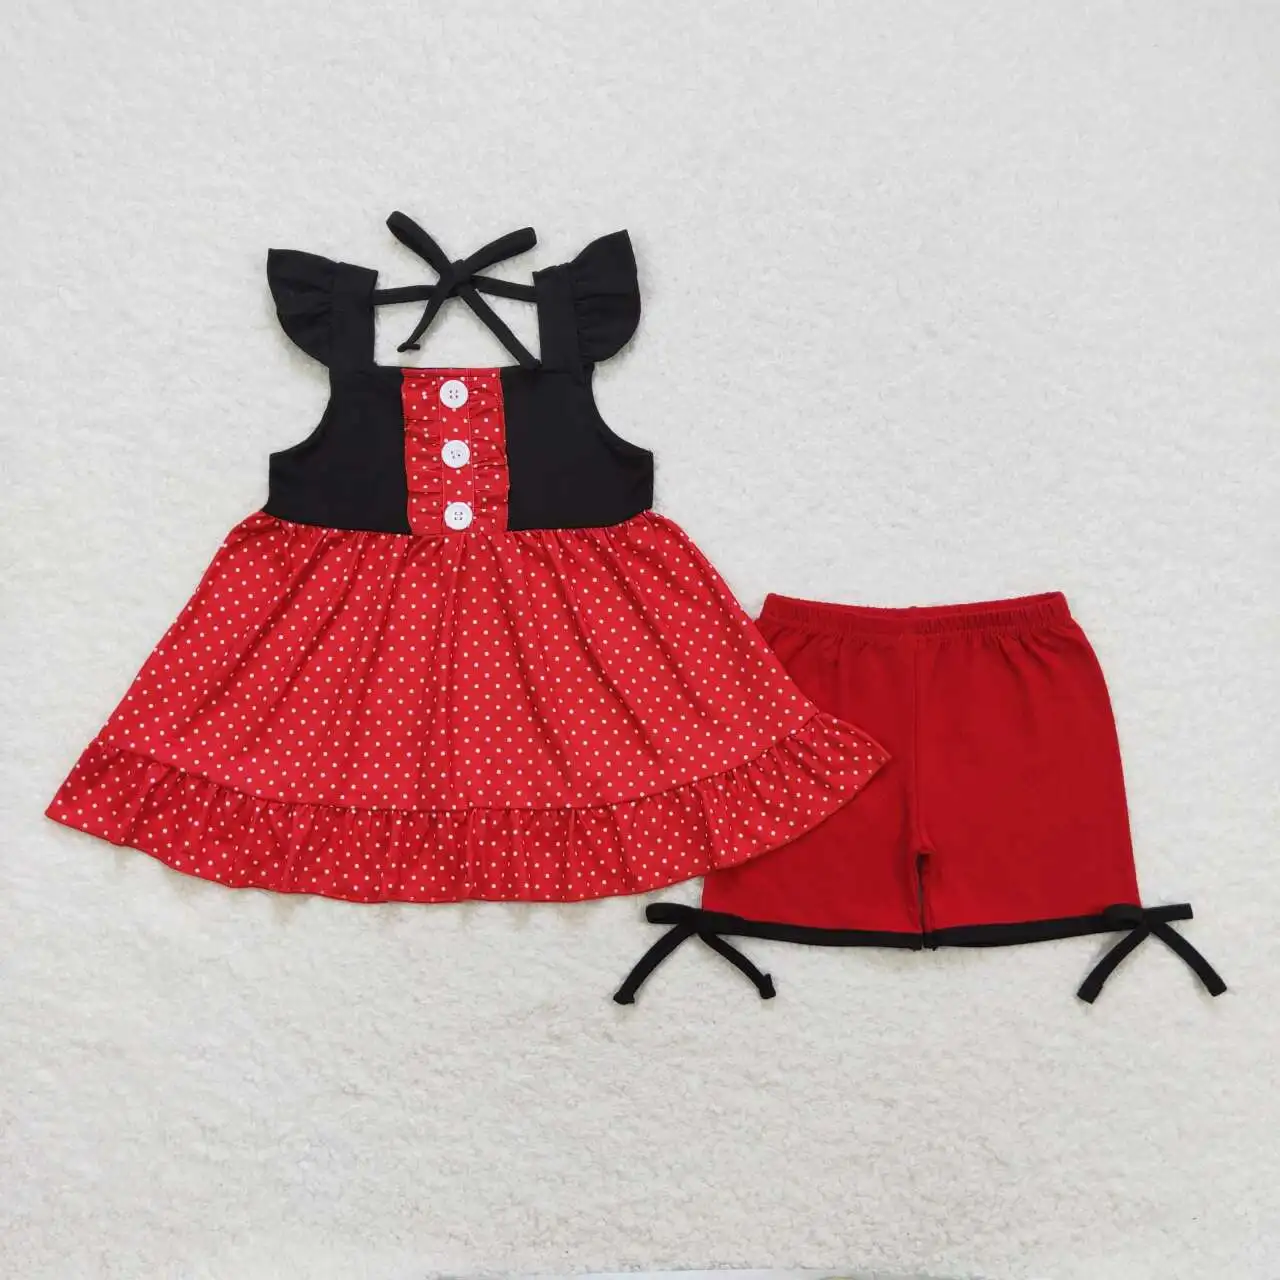 

Baby Girls red polka dot outfits summer clothing Toddlers wholesale boutique Baby Short Sleeves Top cotton Shorts Kids new sets